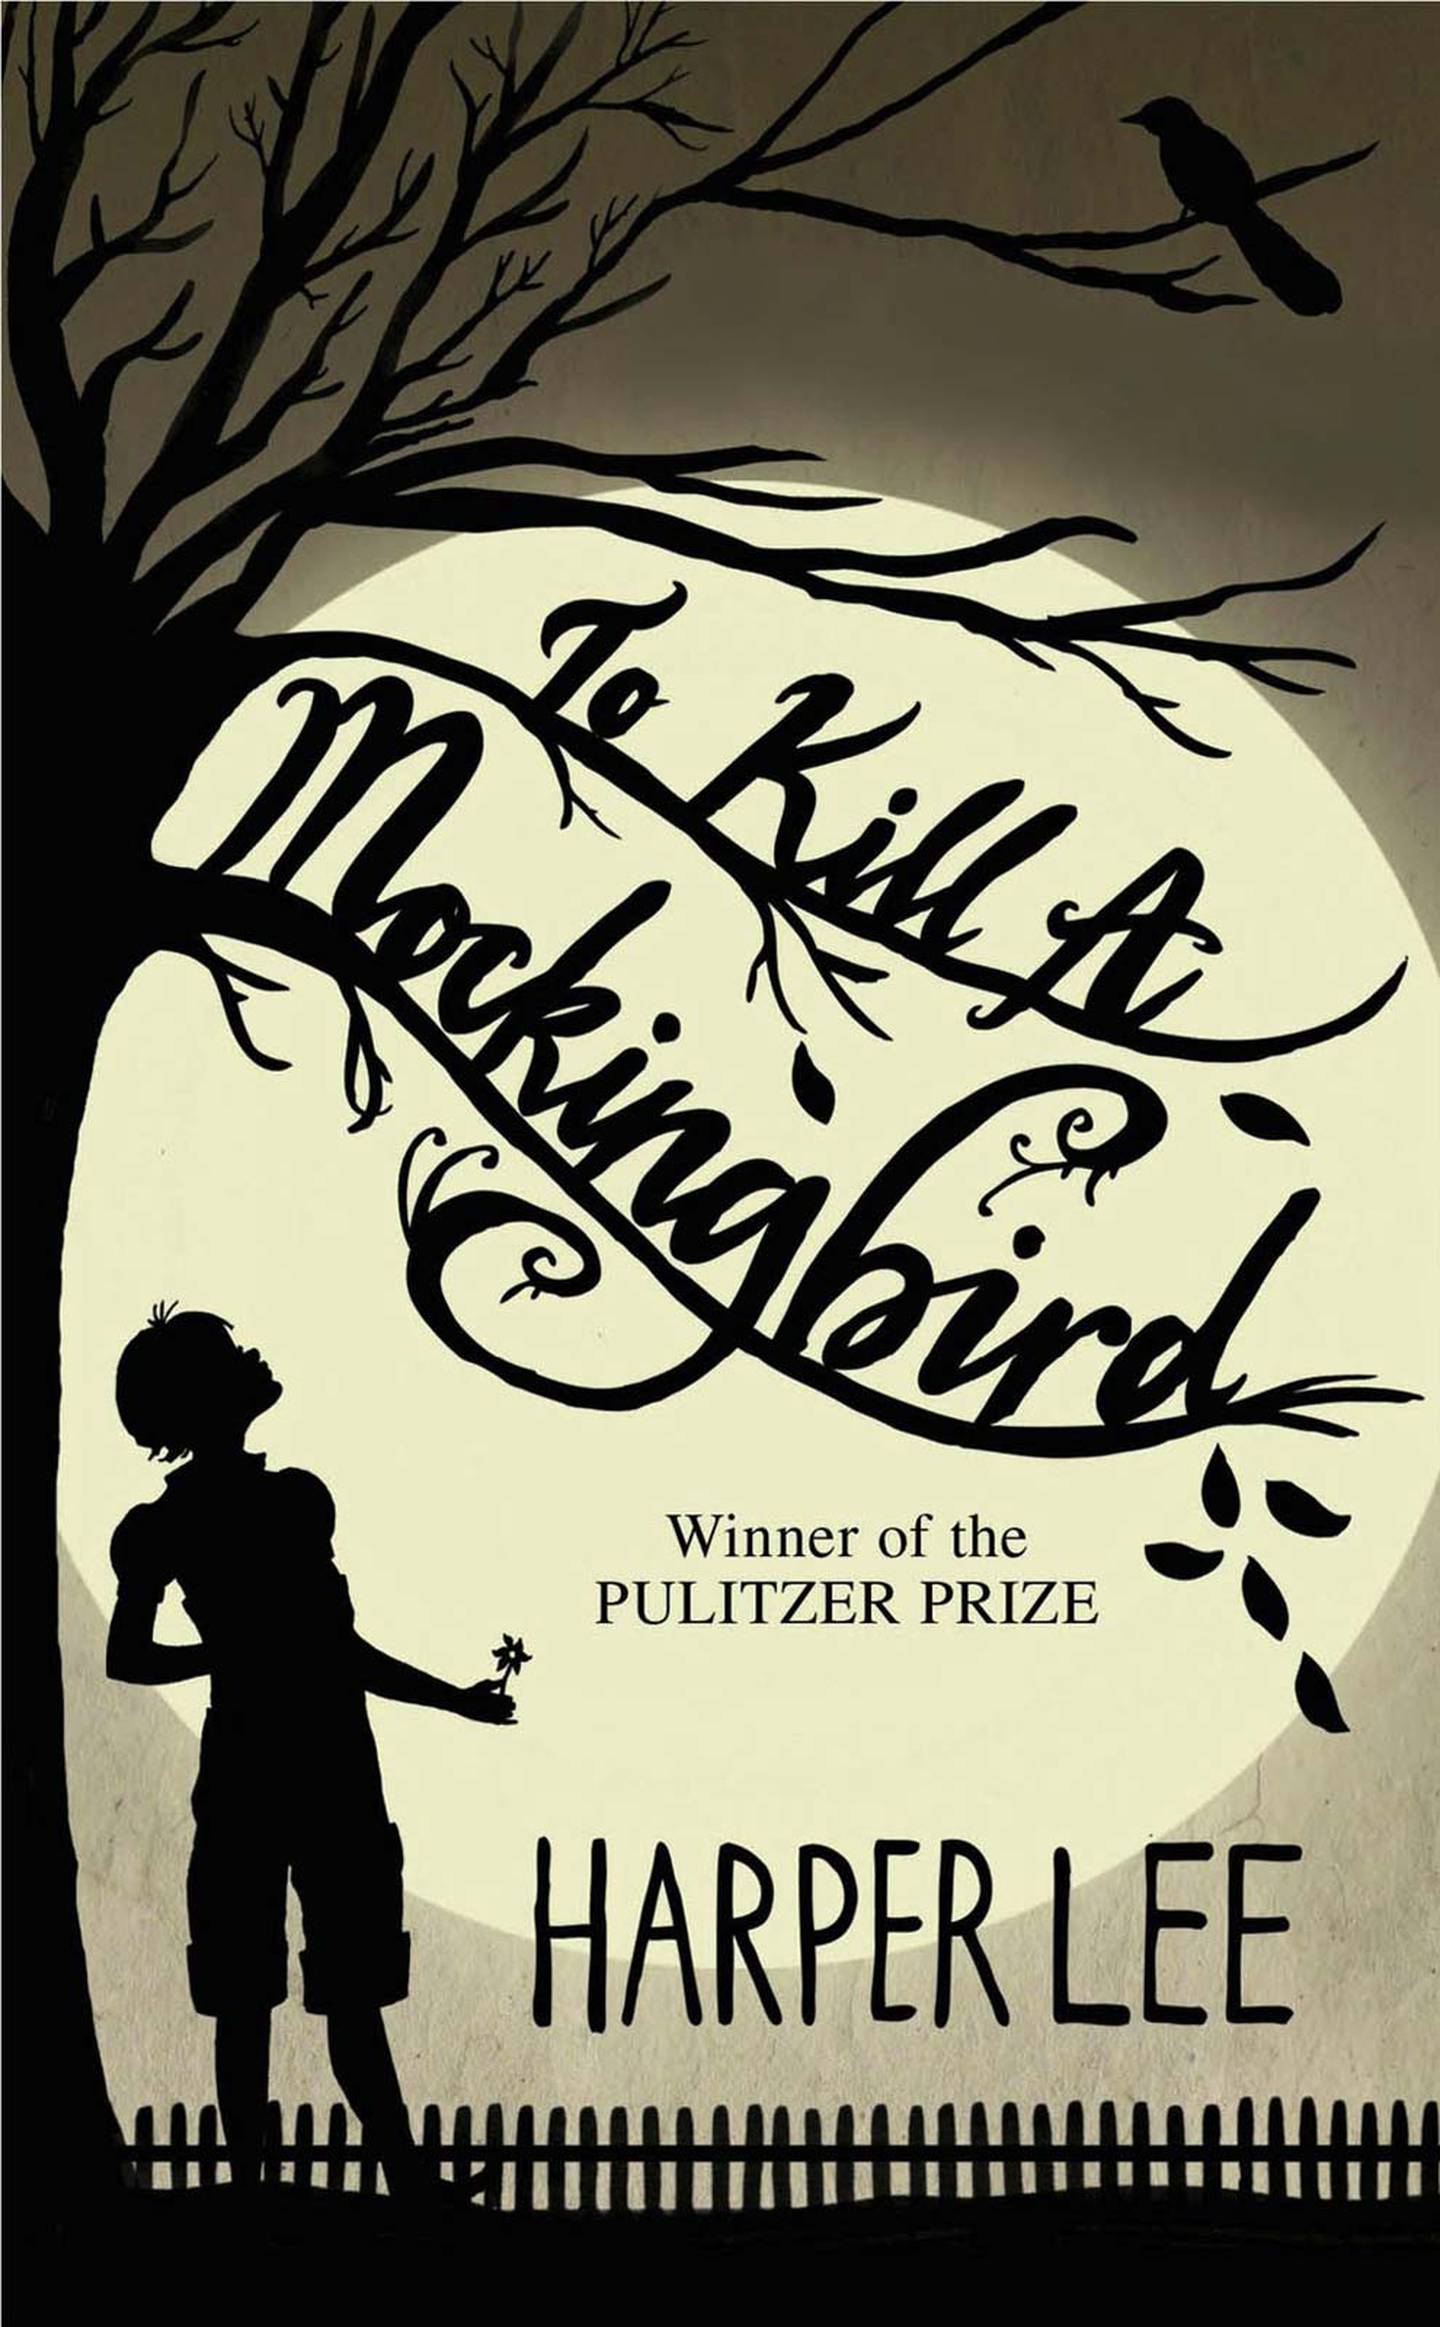 Harper Lee's To Kill a Mockingbird won the Pulitzer Prize in 1961 and has sold more than 30 million copies worldwide.